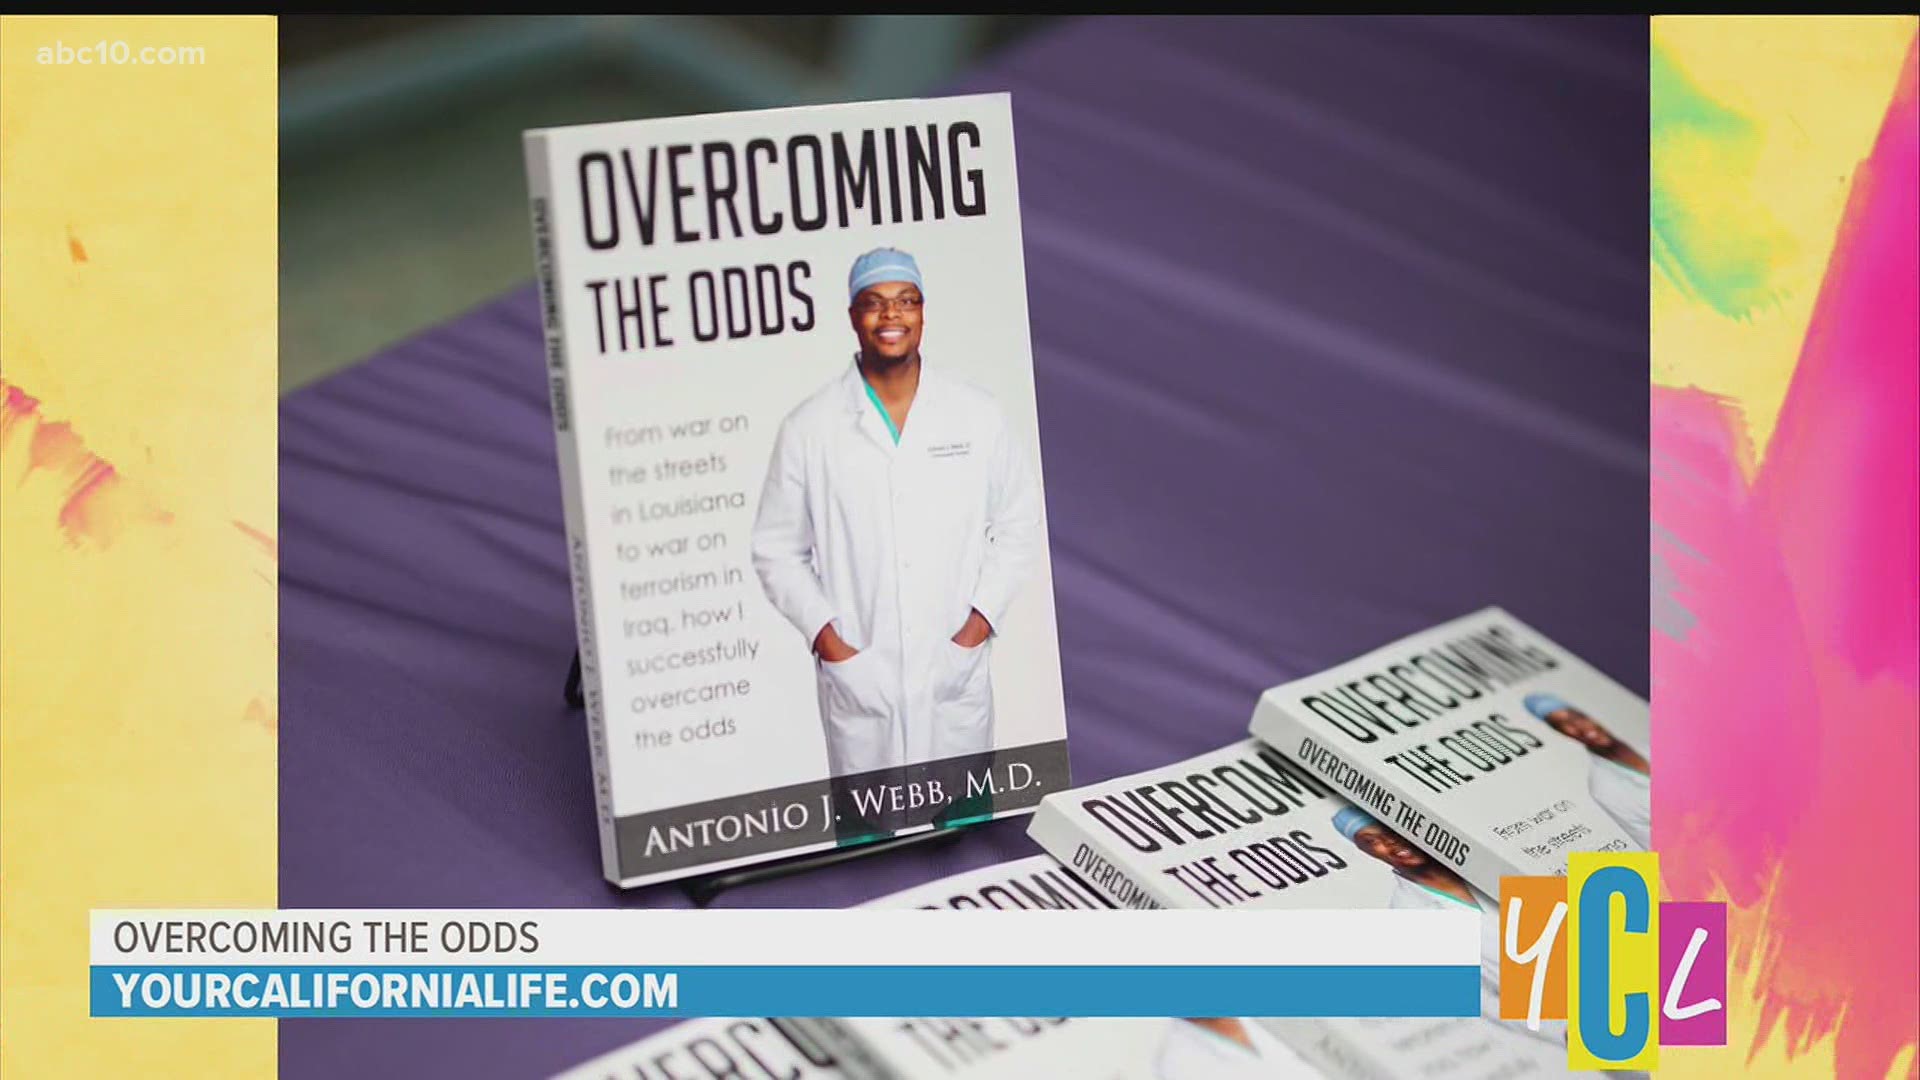 Dr. Antonio Webb is one of a few African American spine surgeons in the US and he's sharing his story with the book and documentary, "Overcoming the Odds."